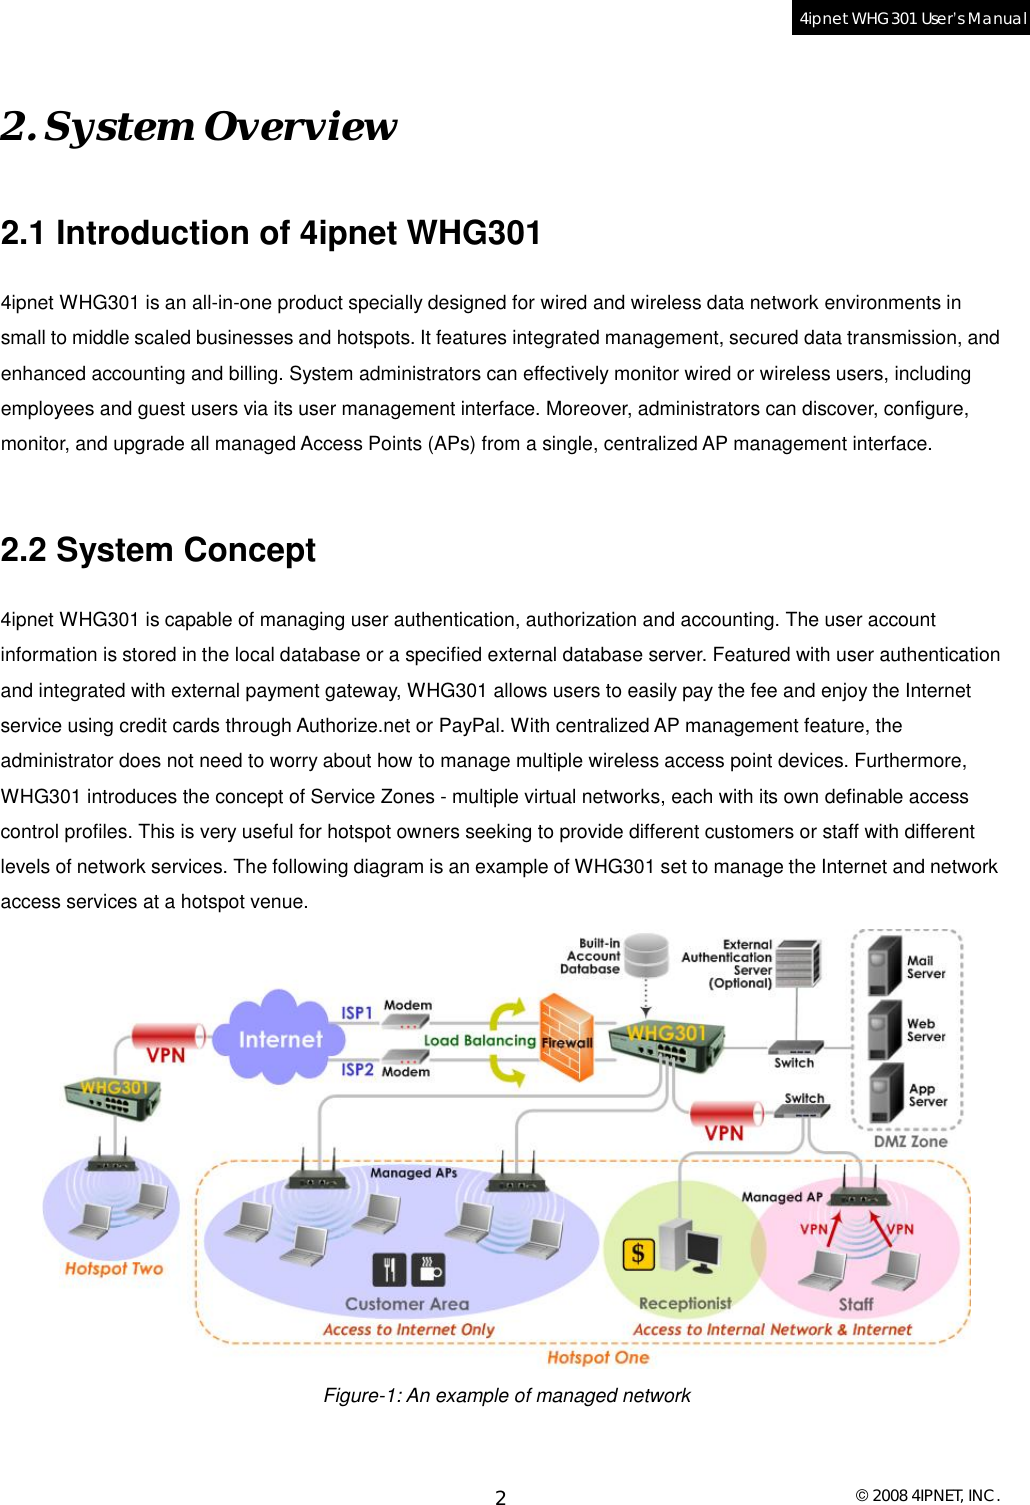  © 2008 4IPNET, INC. 2 4ipnet WHG301 User’s Manual  2. System Overview 2.1 Introduction of 4ipnet WHG301 4ipnet WHG301 is an all-in-one product specially designed for wired and wireless data network environments in small to middle scaled businesses and hotspots. It features integrated management, secured data transmission, and enhanced accounting and billing. System administrators can effectively monitor wired or wireless users, including employees and guest users via its user management interface. Moreover, administrators can discover, configure, monitor, and upgrade all managed Access Points (APs) from a single, centralized AP management interface.  2.2 System Concept 4ipnet WHG301 is capable of managing user authentication, authorization and accounting. The user account information is stored in the local database or a specified external database server. Featured with user authentication and integrated with external payment gateway, WHG301 allows users to easily pay the fee and enjoy the Internet service using credit cards through Authorize.net or PayPal. With centralized AP management feature, the administrator does not need to worry about how to manage multiple wireless access point devices. Furthermore, WHG301 introduces the concept of Service Zones - multiple virtual networks, each with its own definable access control profiles. This is very useful for hotspot owners seeking to provide different customers or staff with different levels of network services. The following diagram is an example of WHG301 set to manage the Internet and network access services at a hotspot venue.  Figure-1: An example of managed network  